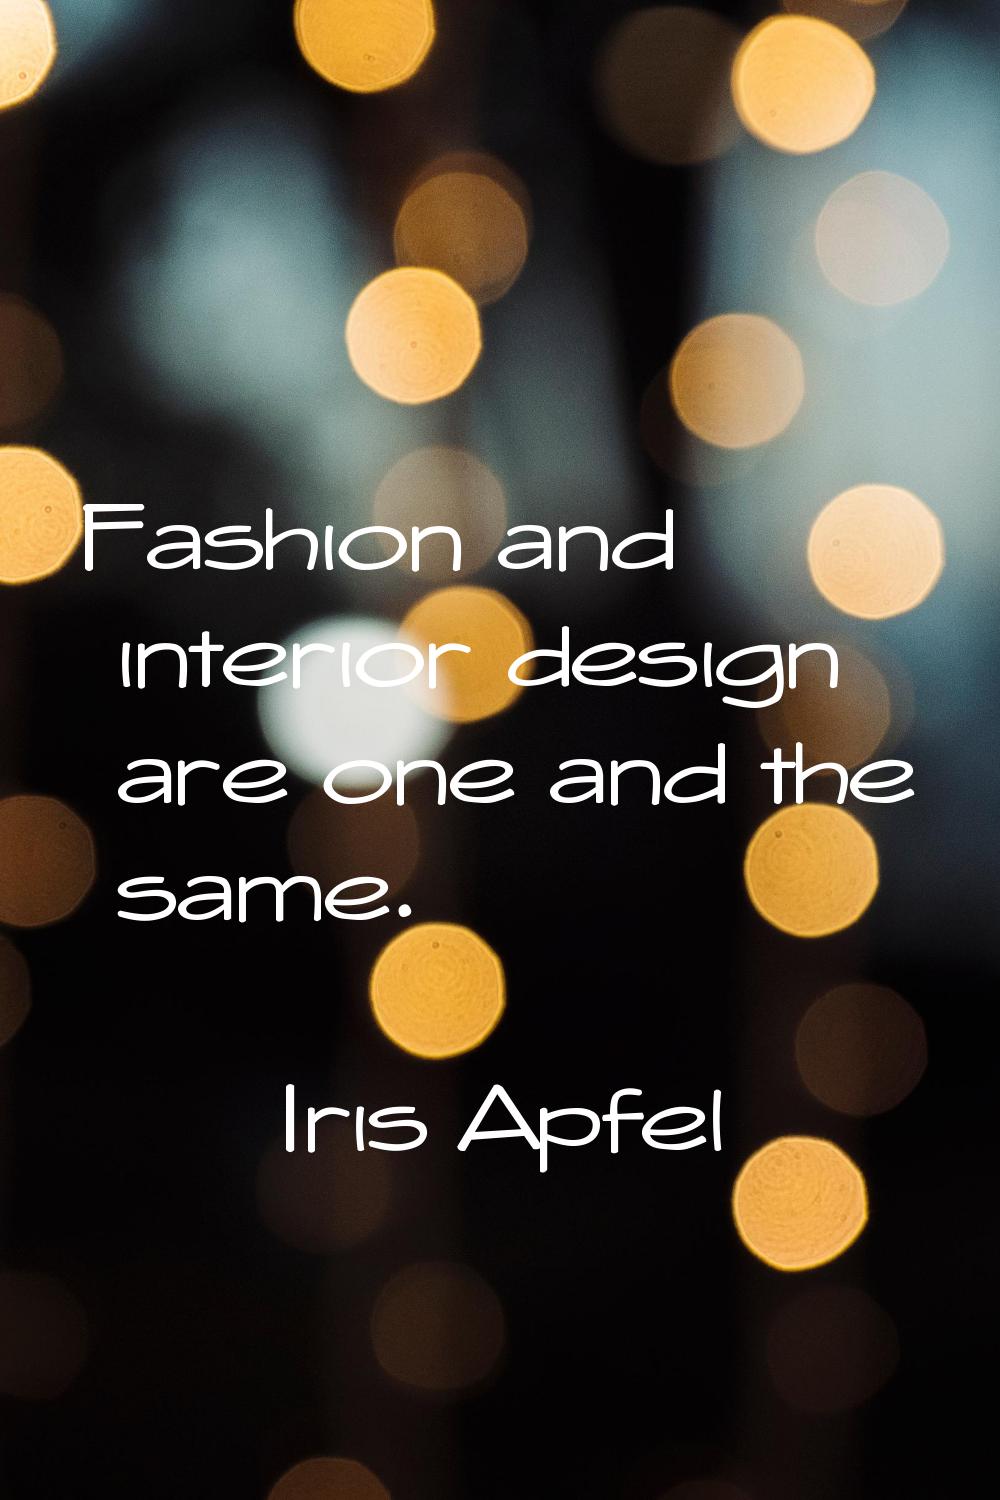 Fashion and interior design are one and the same.